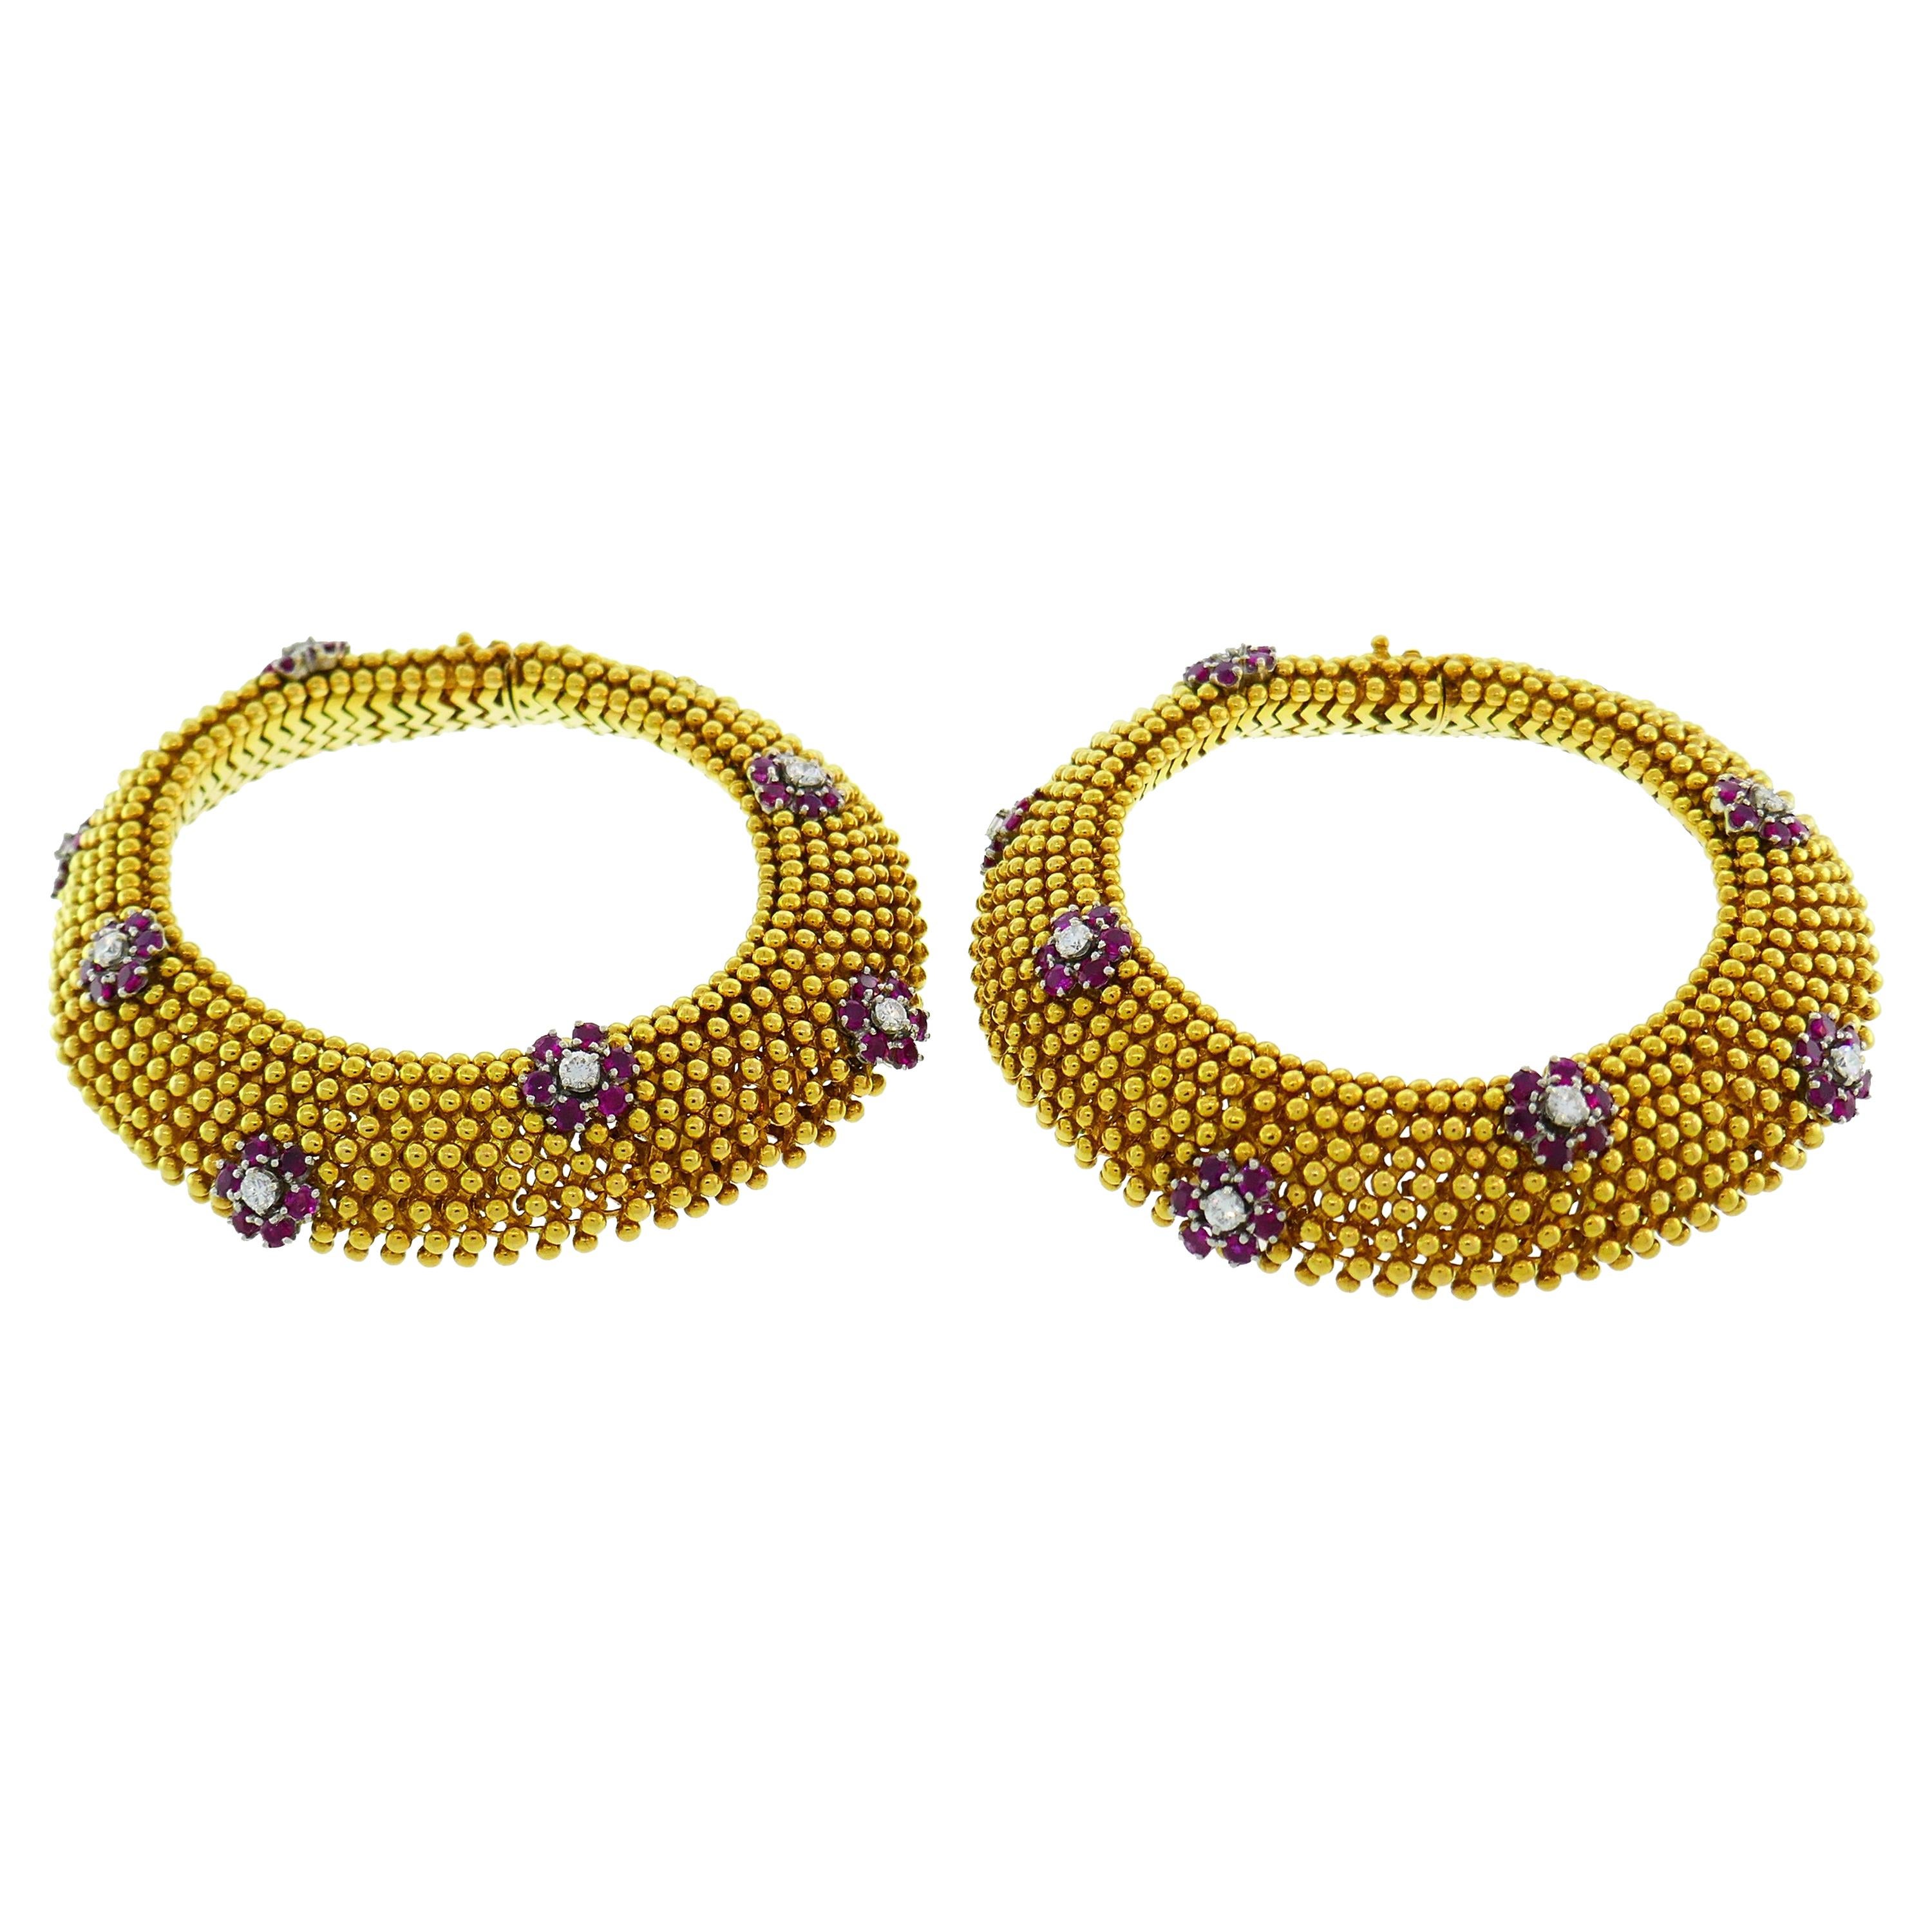 Classy and feminine pair of bracelets created in the 1970's. Tasteful color combination of yellow gold and red ruby with sparkly diamonds, volume, outstanding workmanship make the bracelet  elegant, stylish and very chic. The pair is a great